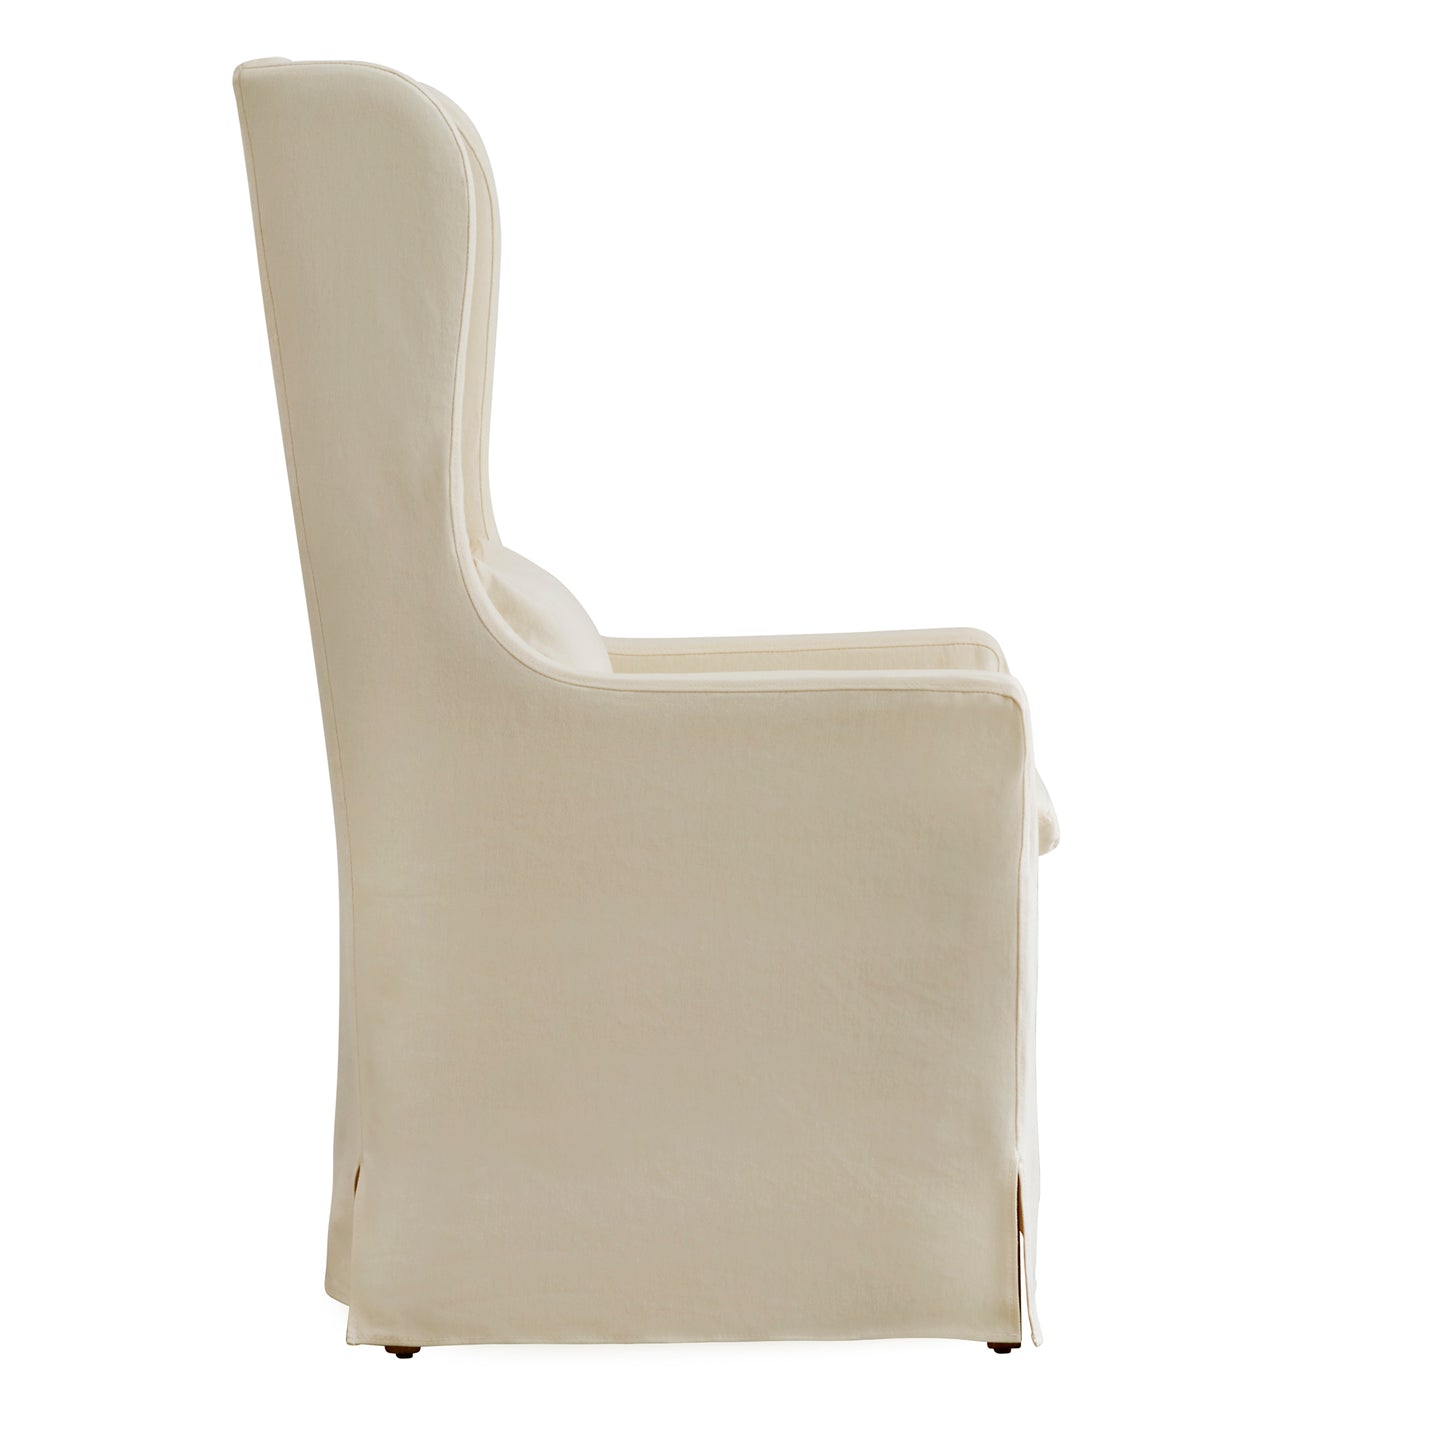 Slipcovered Wingback Parson Chair - Cream